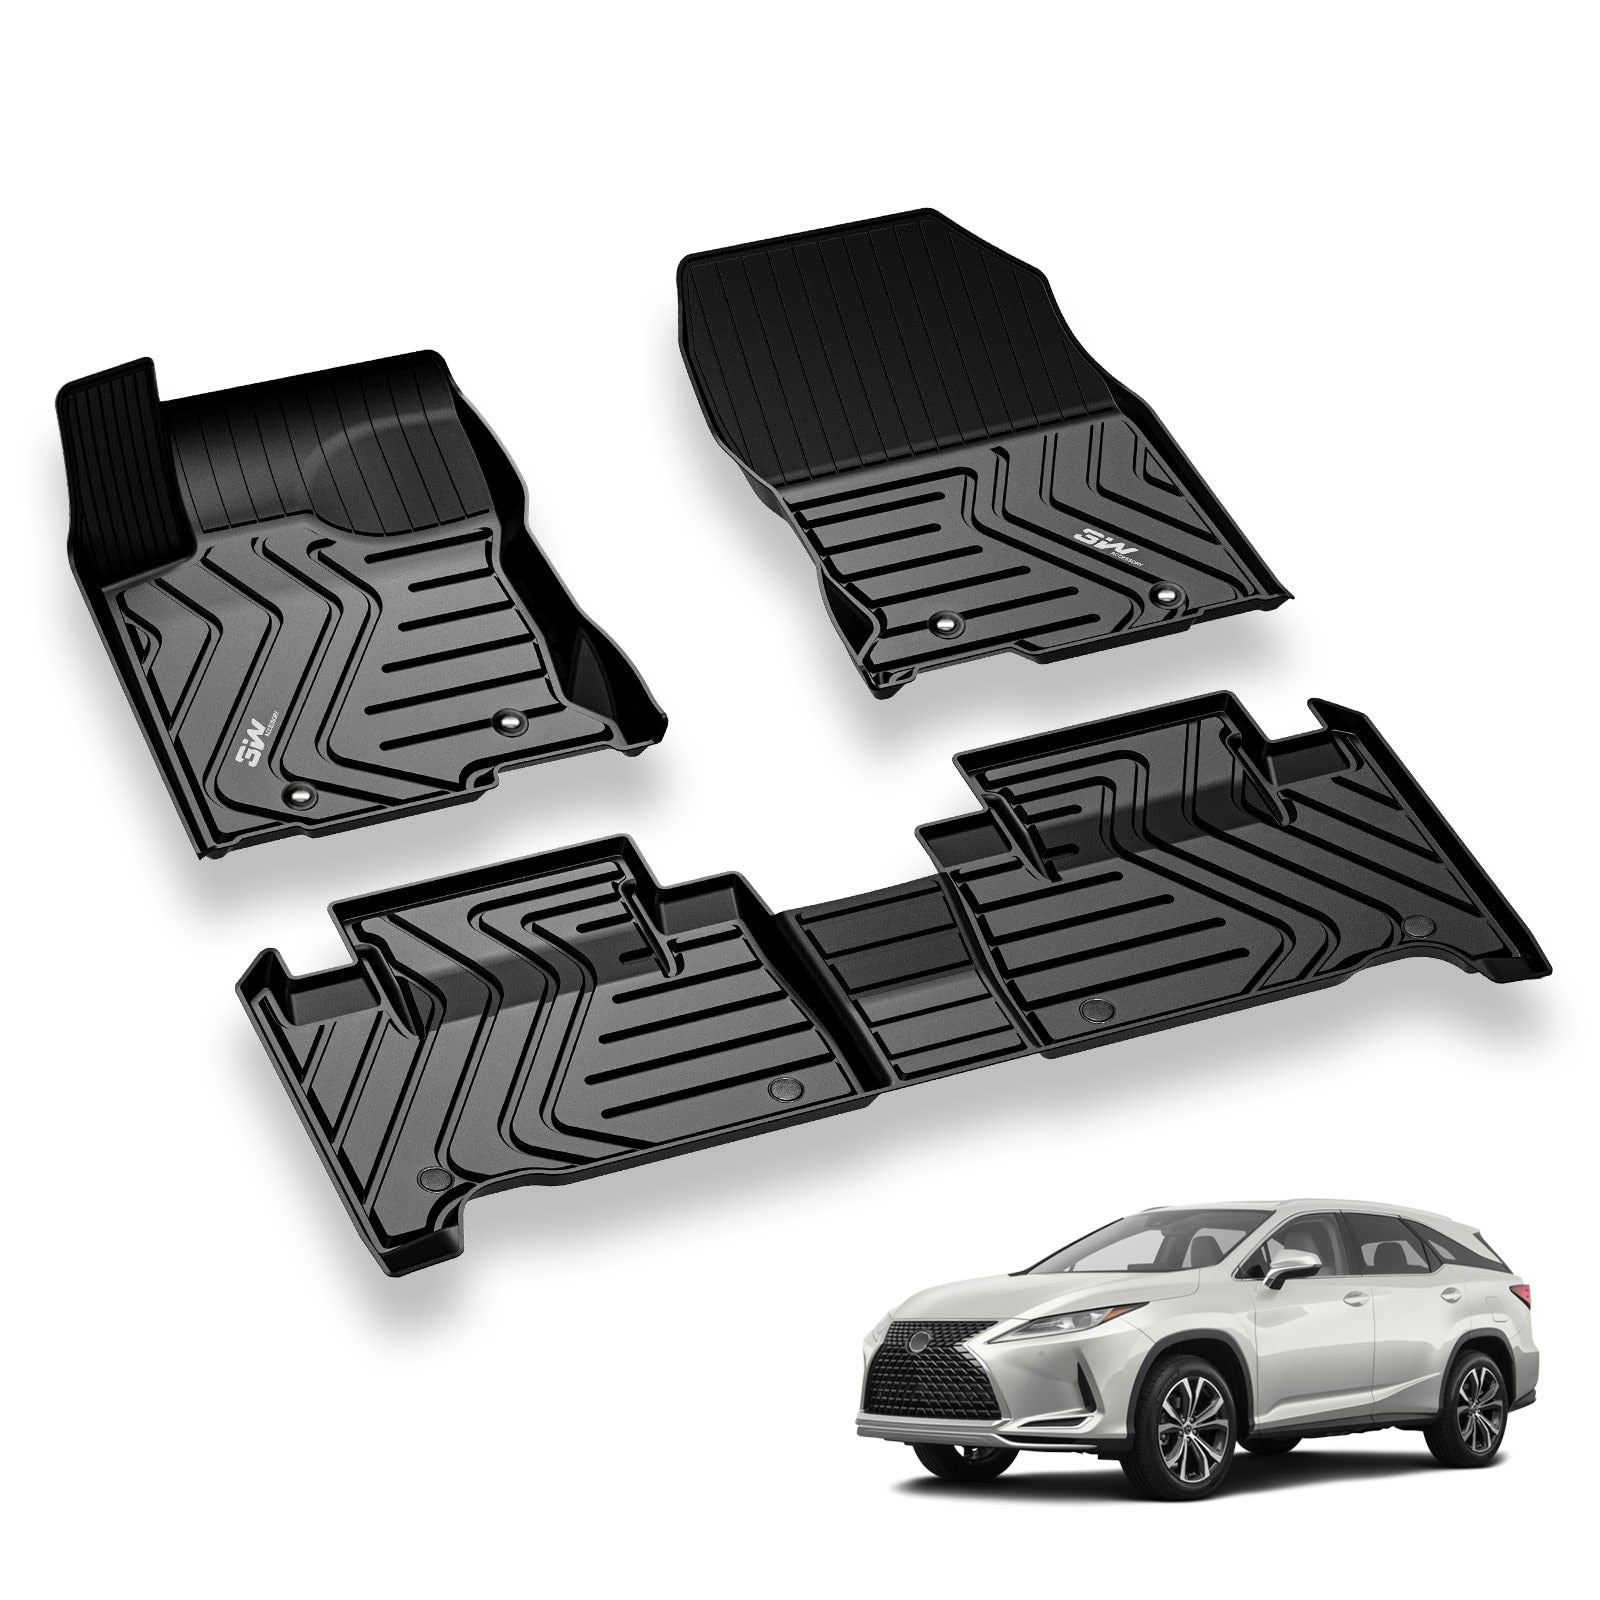 3W LEXUS RX 2016-2022 (RX350/RX450h) / 2018-2022 RXL (RX350L/450hL) Custom Floor Mats TPE Material & All-Weather Protection Vehicles & Parts 3w 2016-2022 RX 2016-2022 1st&2nd Row Mats